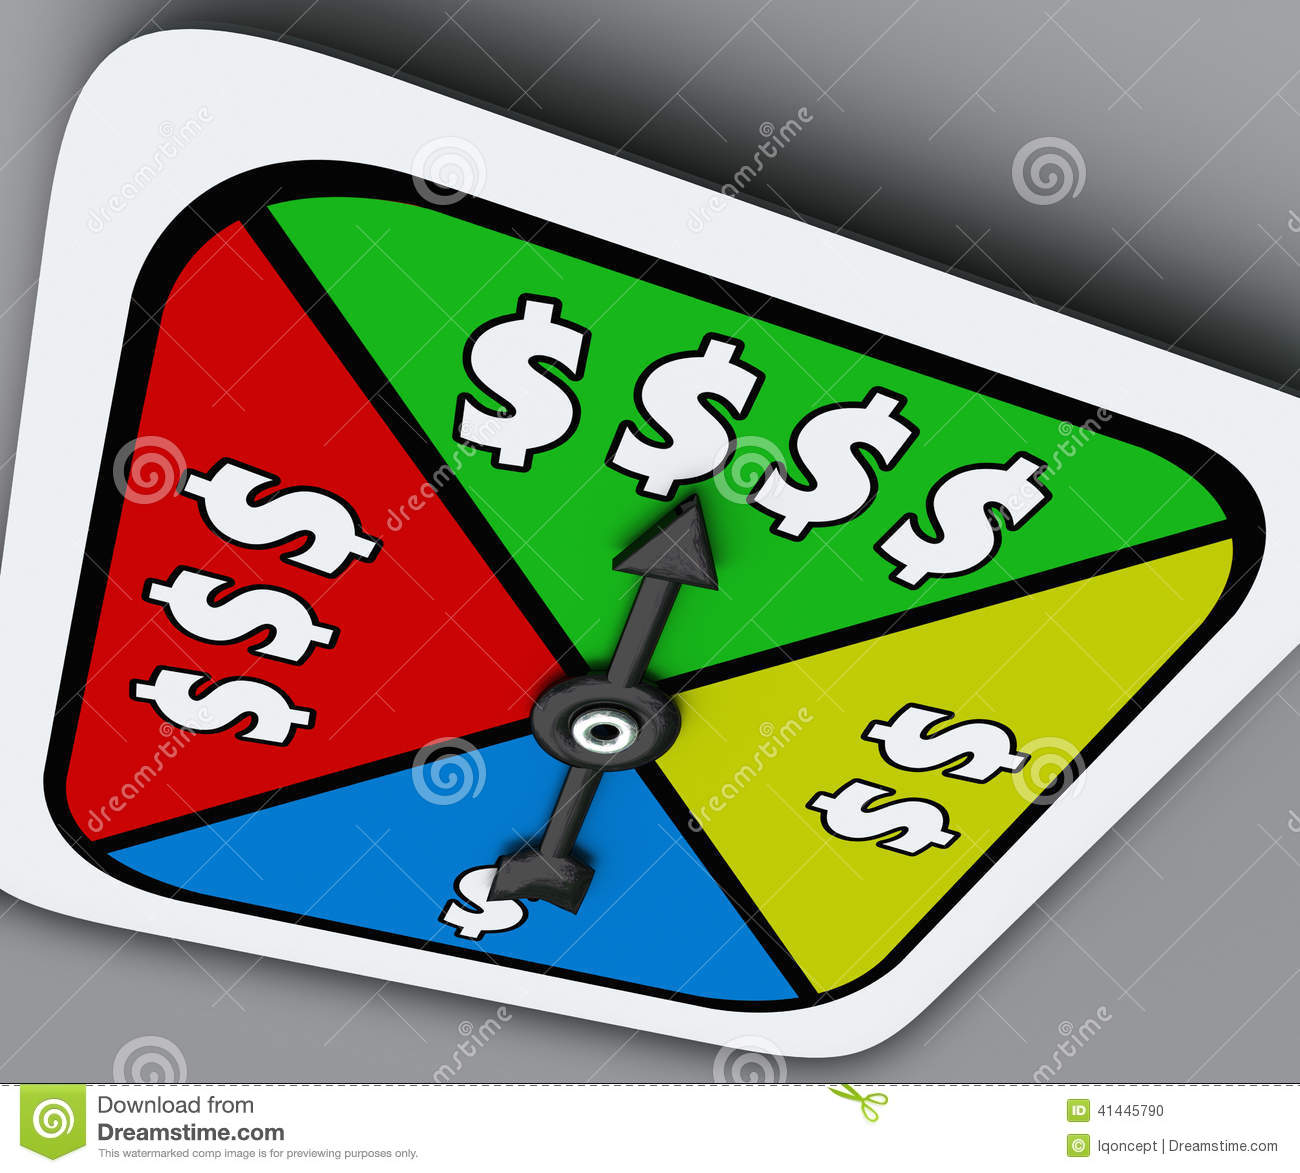 Dollar Signs On A Spinner To Illustrate A Board Game Winning Move Or